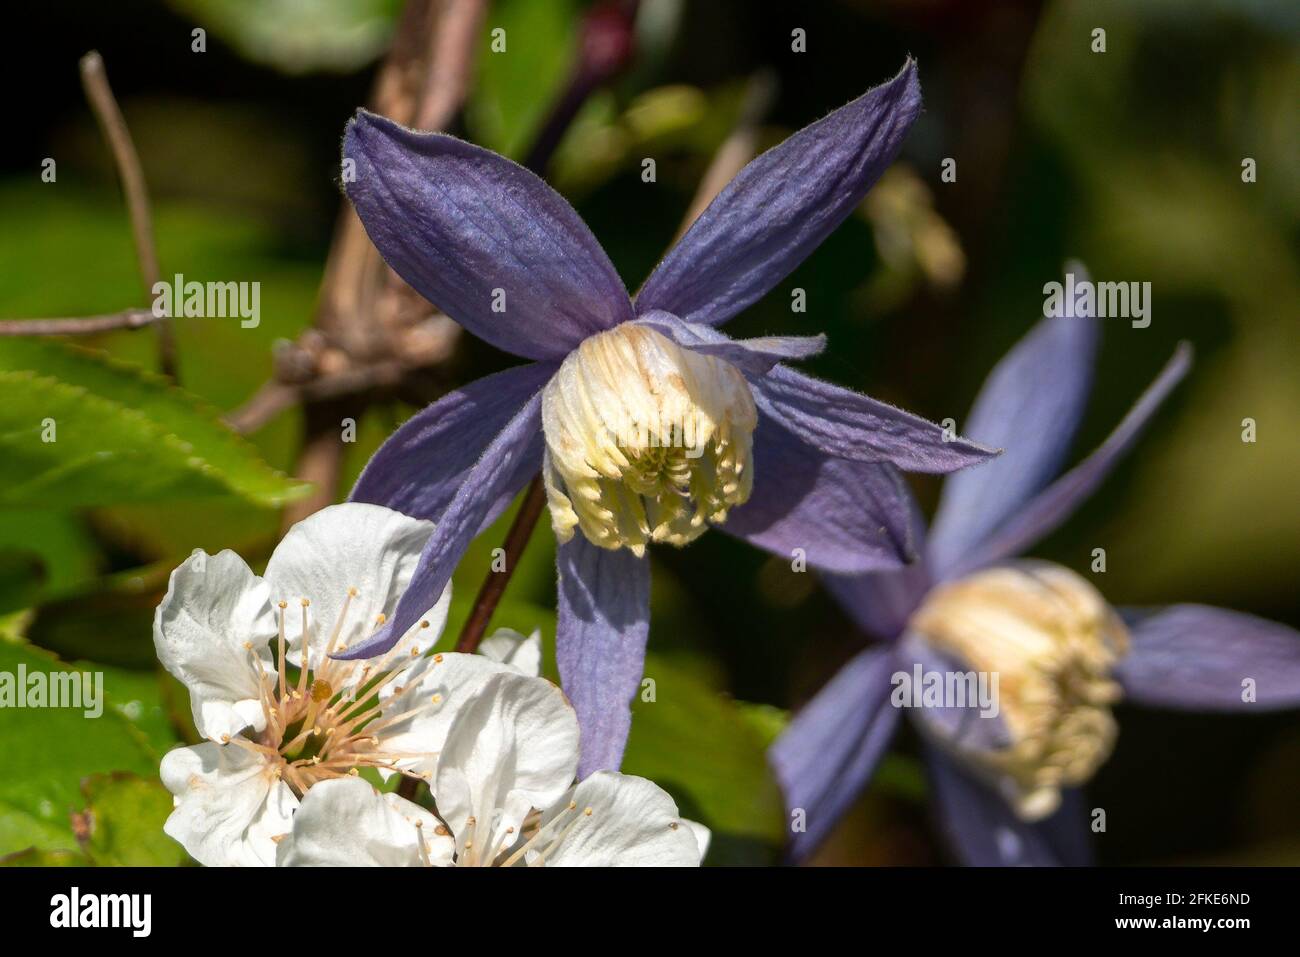 Clematis alpina a spring flowering shrub plant with a blue purple springtime flower which opens from April to May, stock photo image Stock Photo